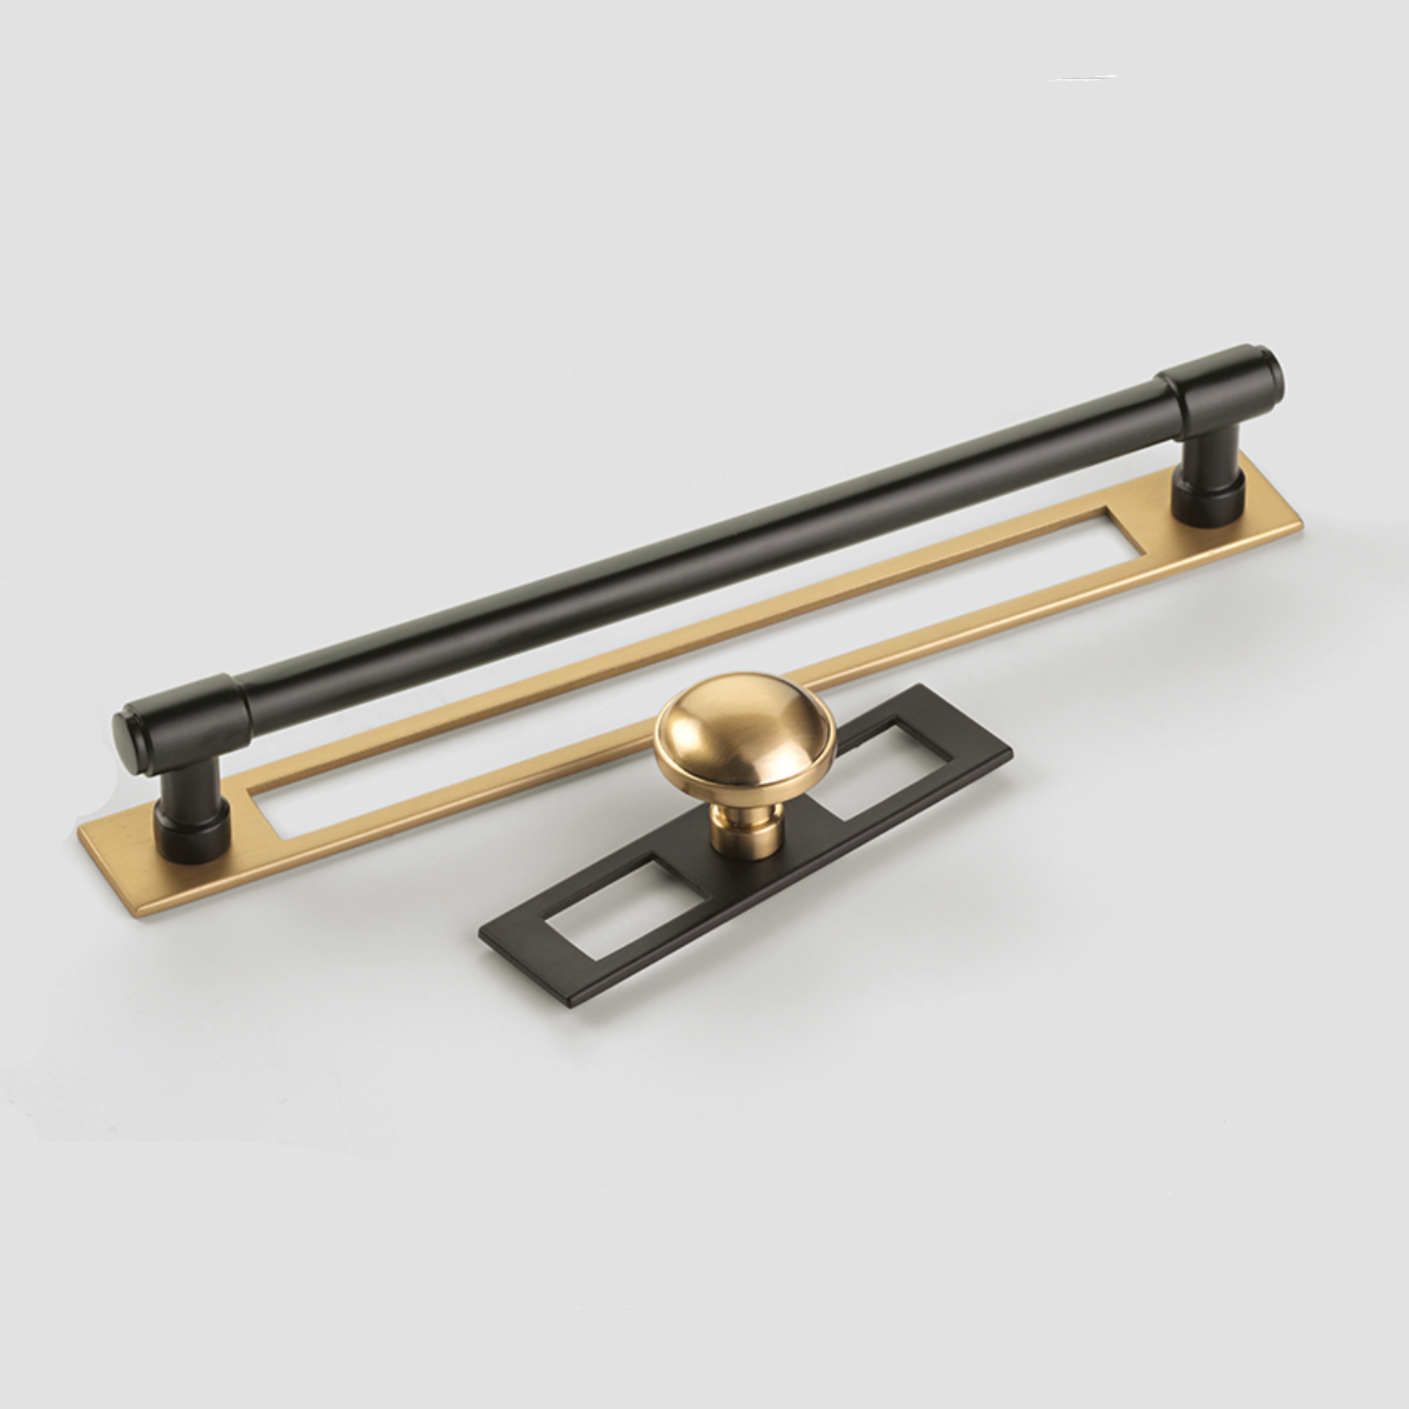 Matte Black and Brass "Industrial Modern" Drawer Pulls and Knob with Backplate - Forge Hardware Studio